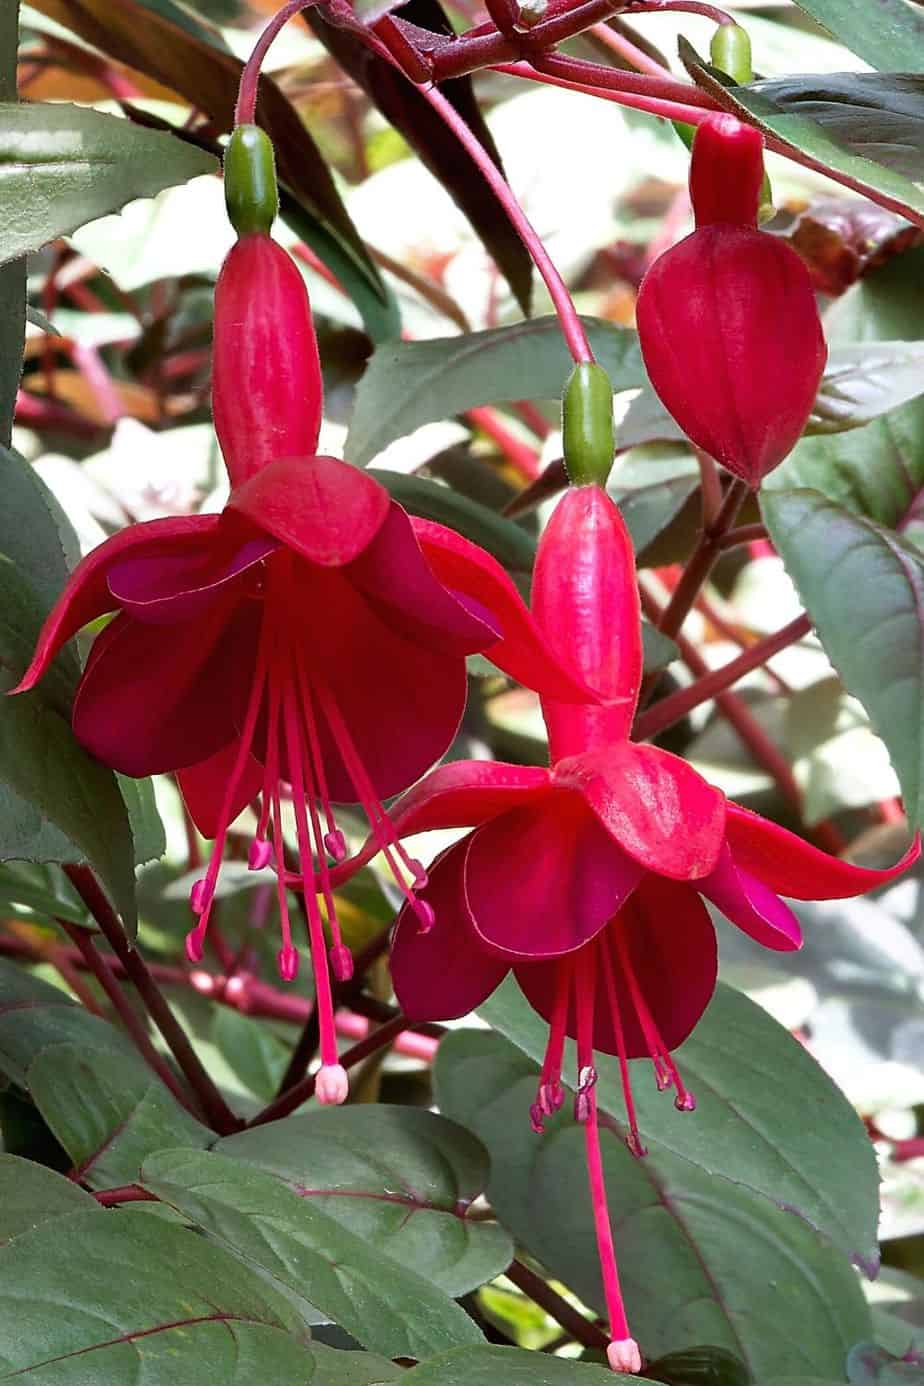 Fuchsia is another stunning plant you can grow on the east-facing side of the house